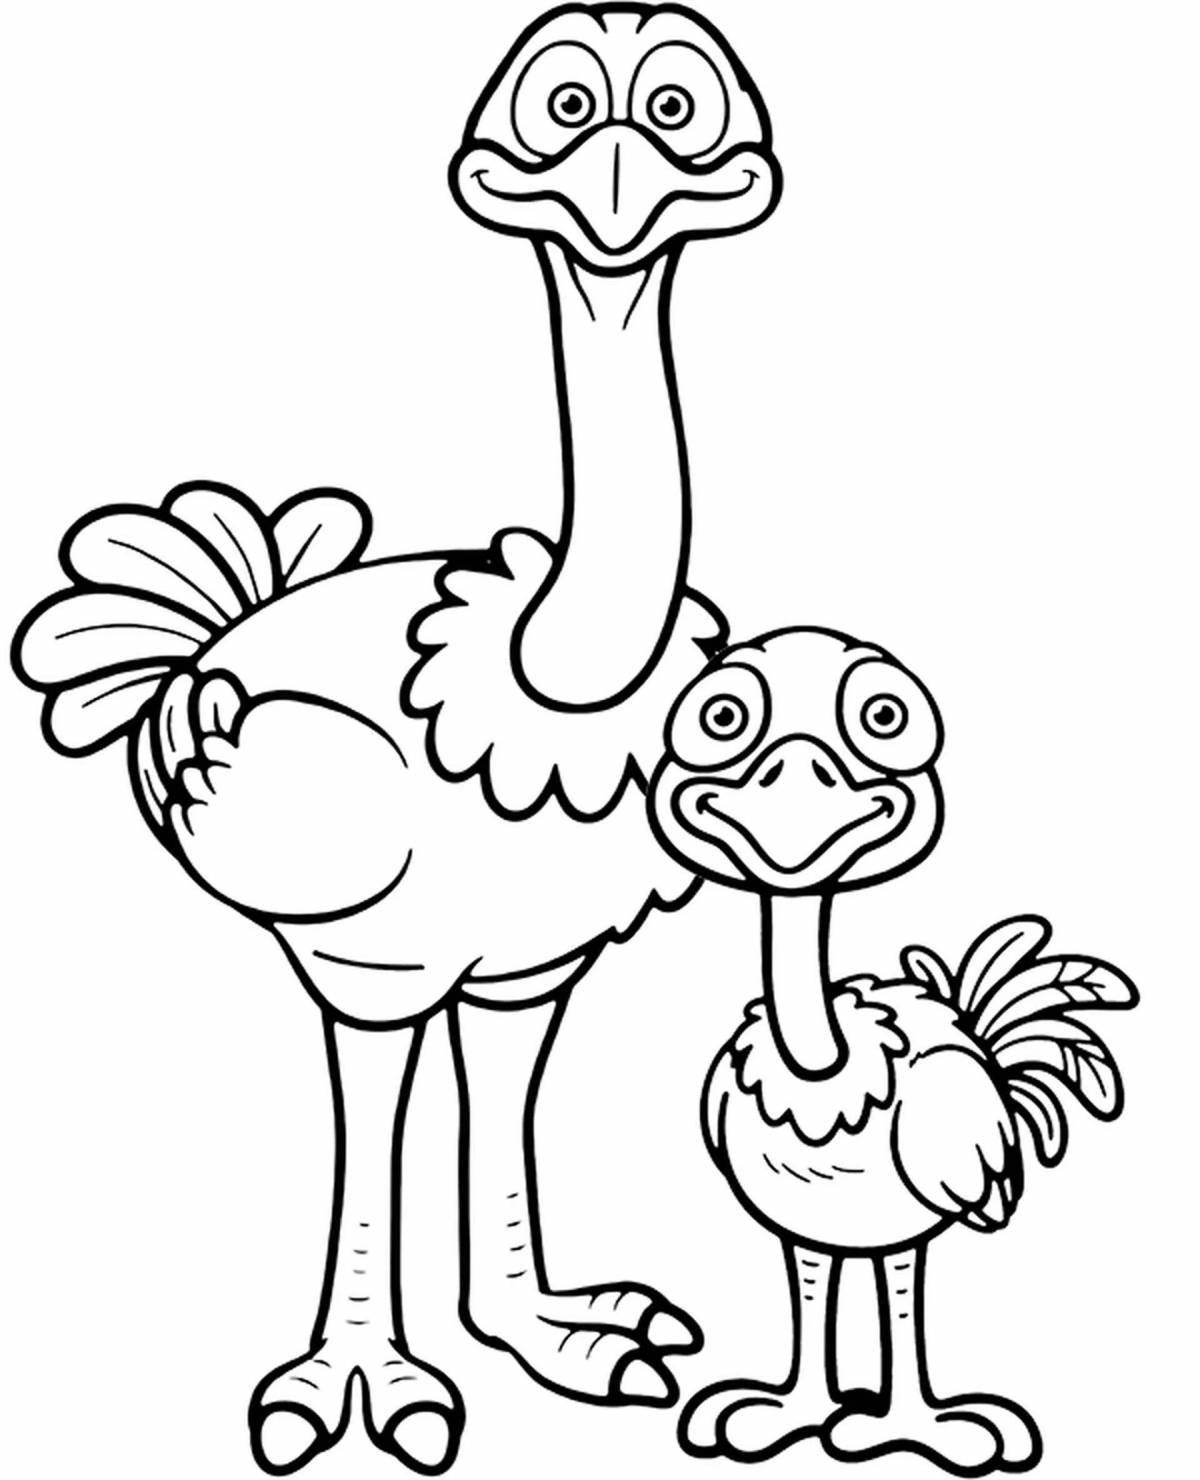 Colorful emu coloring book for kids